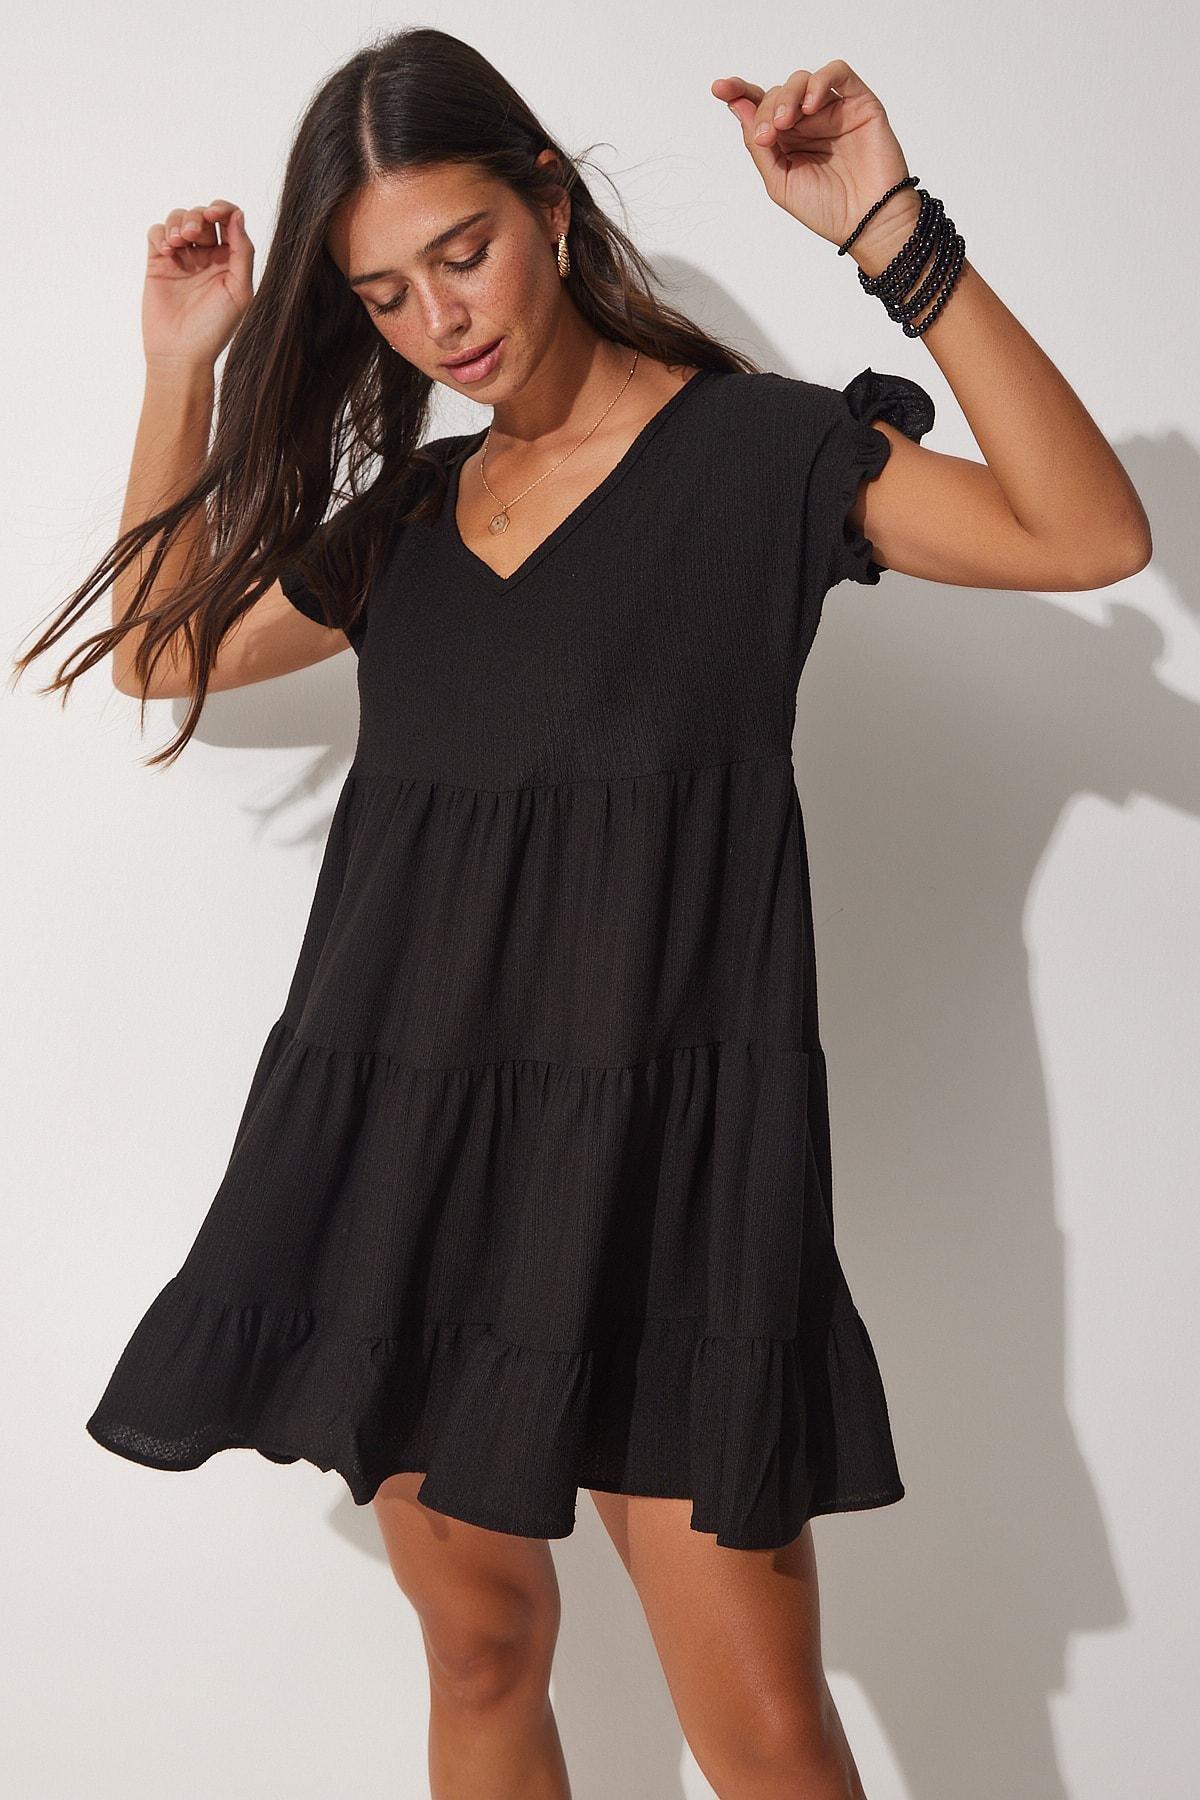 Happiness Istanbul - Black A-Line Dress